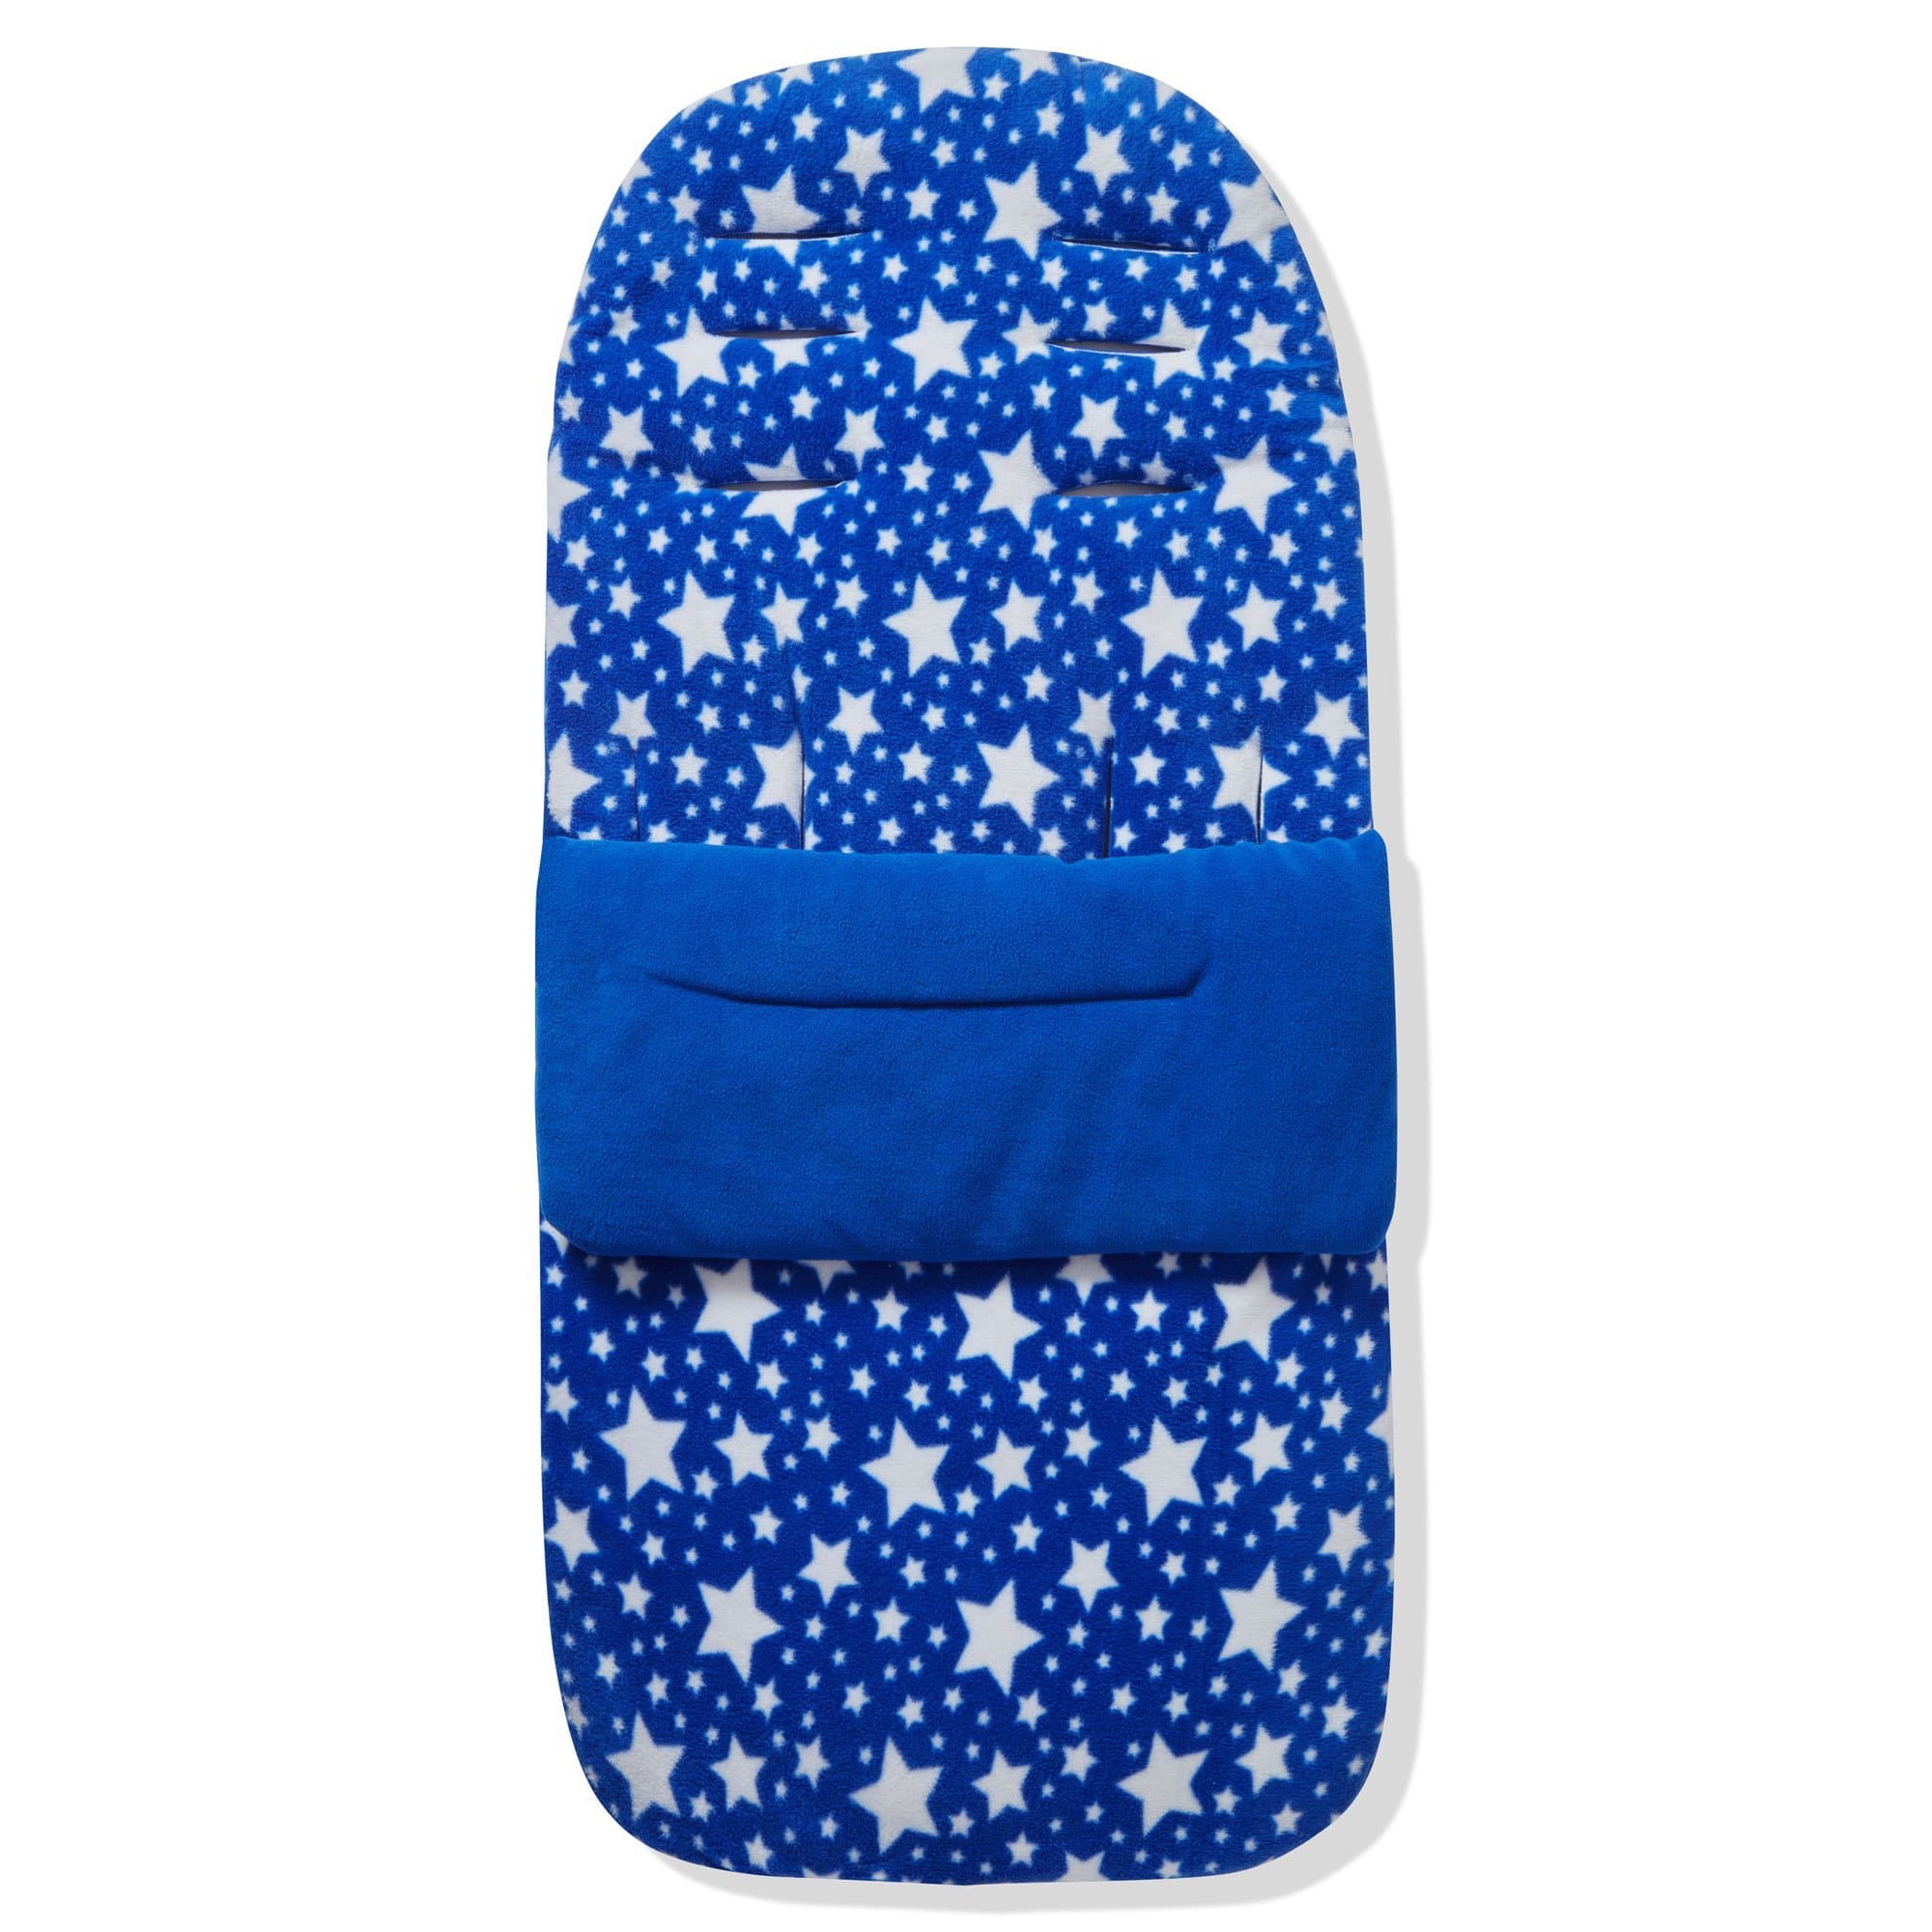 Fleece Footmuff / Cosy Toes Compatible with Mamas & Papas - Blue Star / Fits All Models | For Your Little One